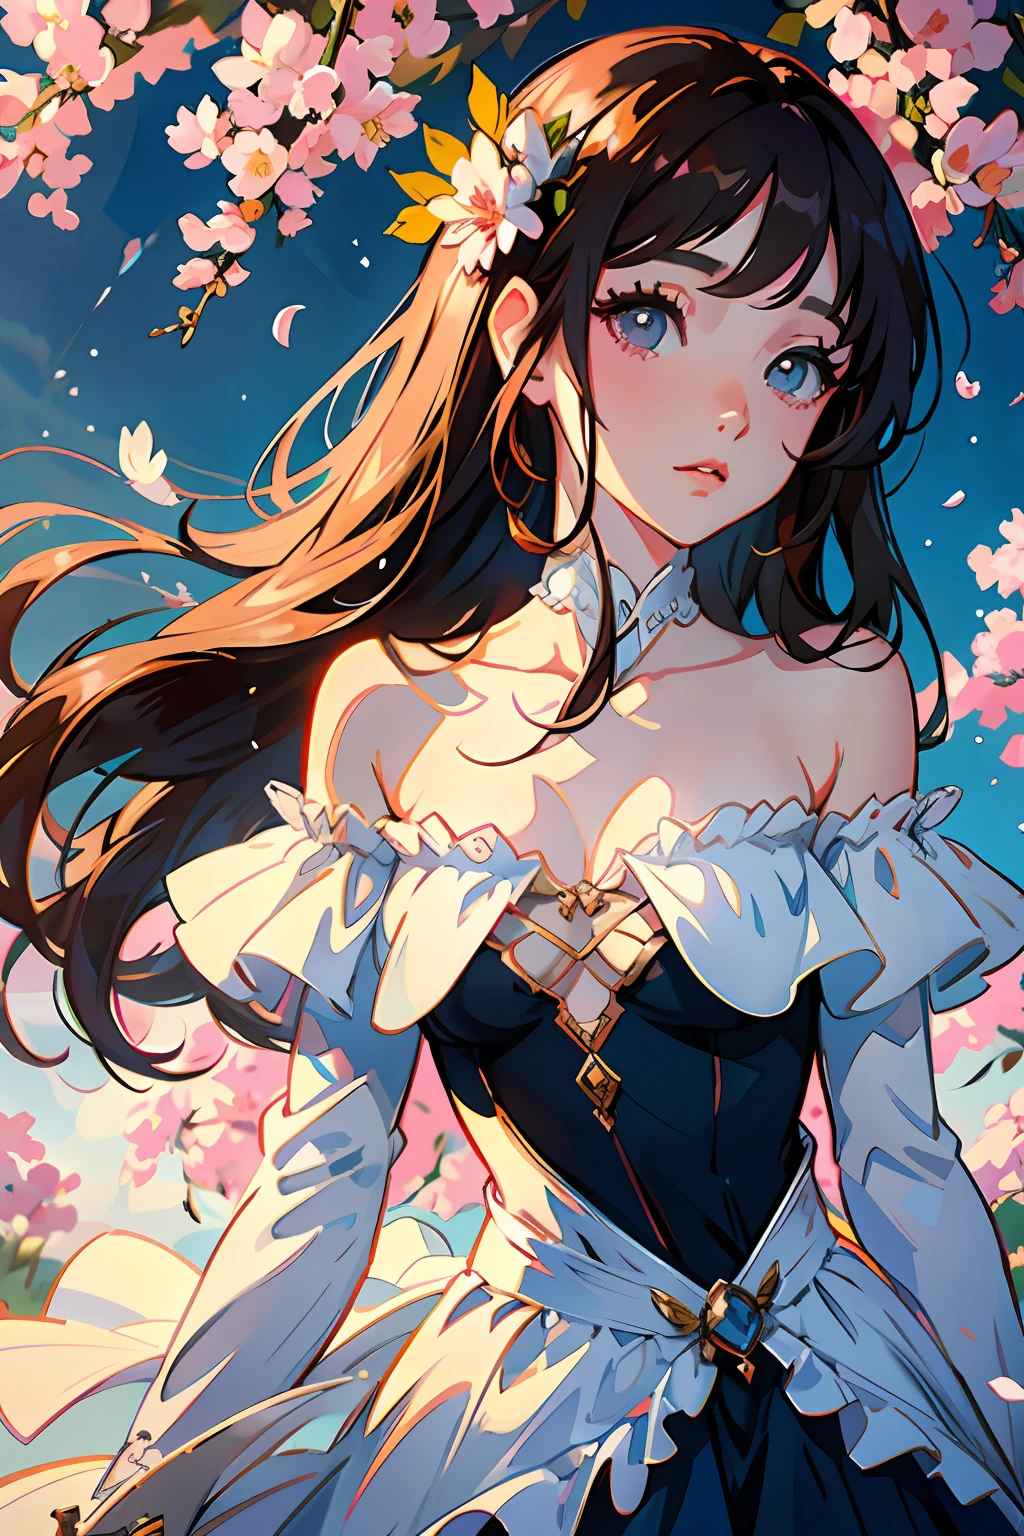 high high quality，tmasterpiece，Delicate facial features，Delicate hair，Delicate eyes，Delicate hair，Romantic girl，Anime shoujo，Pink off-the-shoulder dress，Long brown hair waist-length，Exquisite and delicate，Elegant and gorgeous，dreamy and romantic，Feminine and romantic，blossoms，Cute anime girl in beautiful clothes,  in dress, Fantastic flower garden，Guviz, Style anime, Guviz-style artwork, fantasyoutfit, lovely art style, Dreamy style, fantasy style clothing, Romantic dress, soft cute colors, ，8K high quality detailed art（Delicate facial portrayal）（Fine hair portrayal）（highest  quality）（Master masterpieces）（High degree of completion）（a sense of atmosphere）8k wallpaper，tmasterpiece，Best quality at best，ultra - detailed